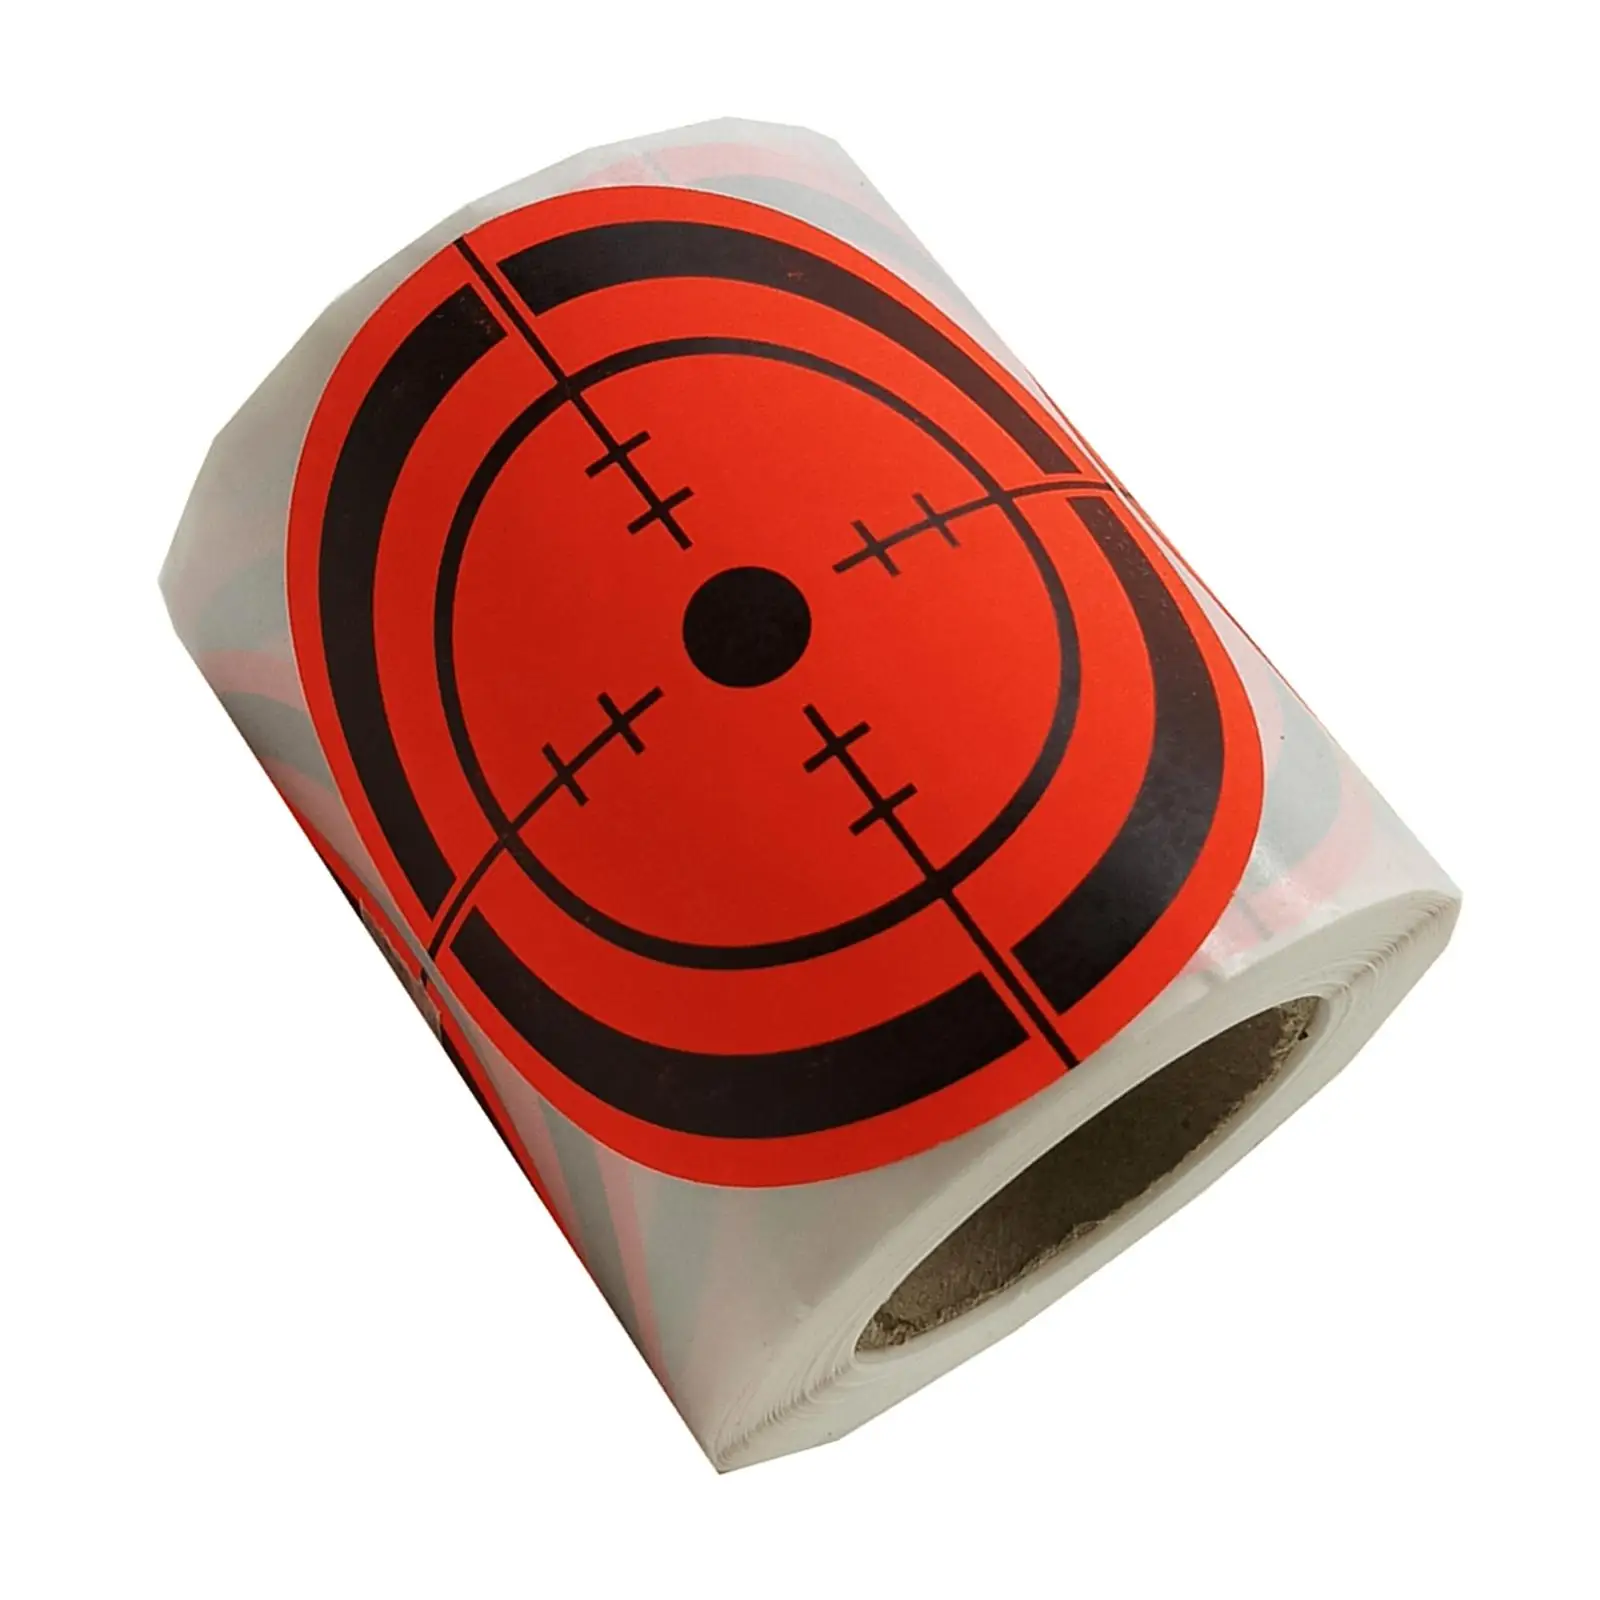 Shooting Targets Self Adhesive Sticker Paper Targets High Visibility